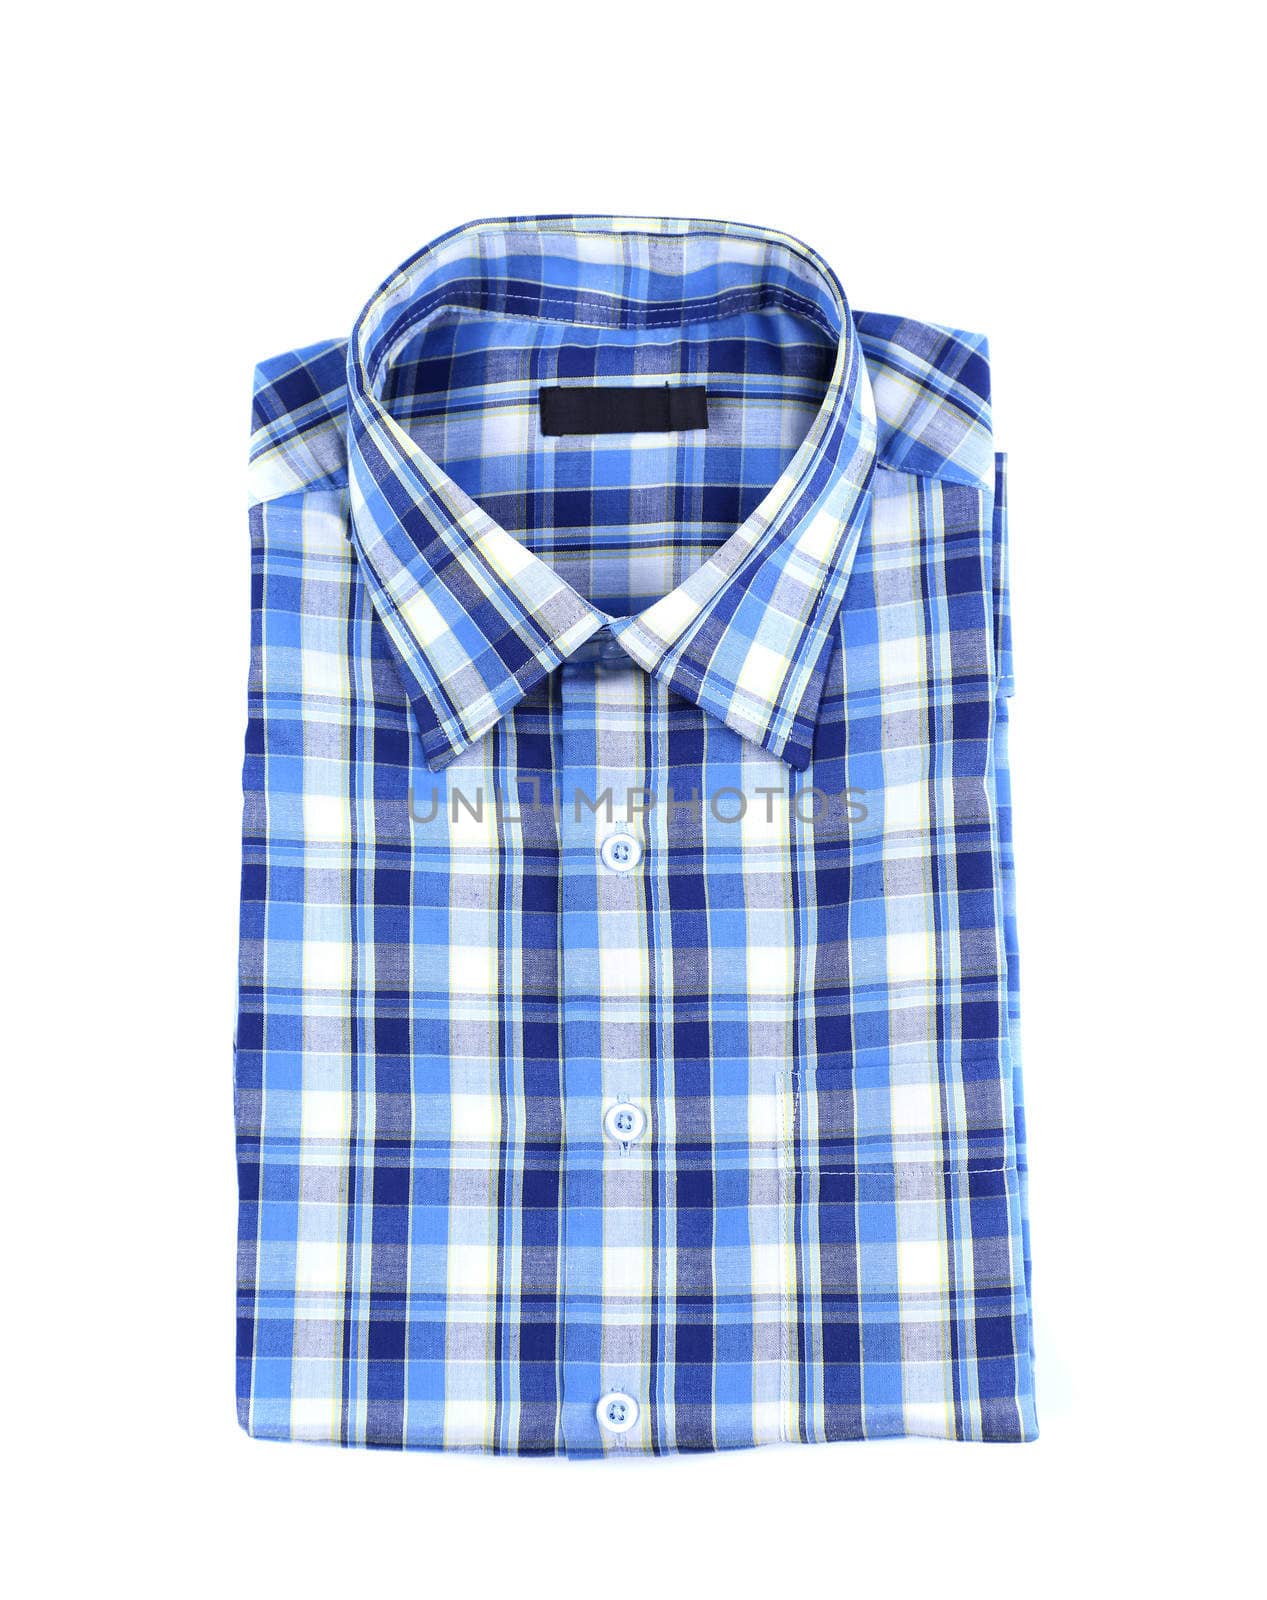 A plaid shirt isolated by indigolotos